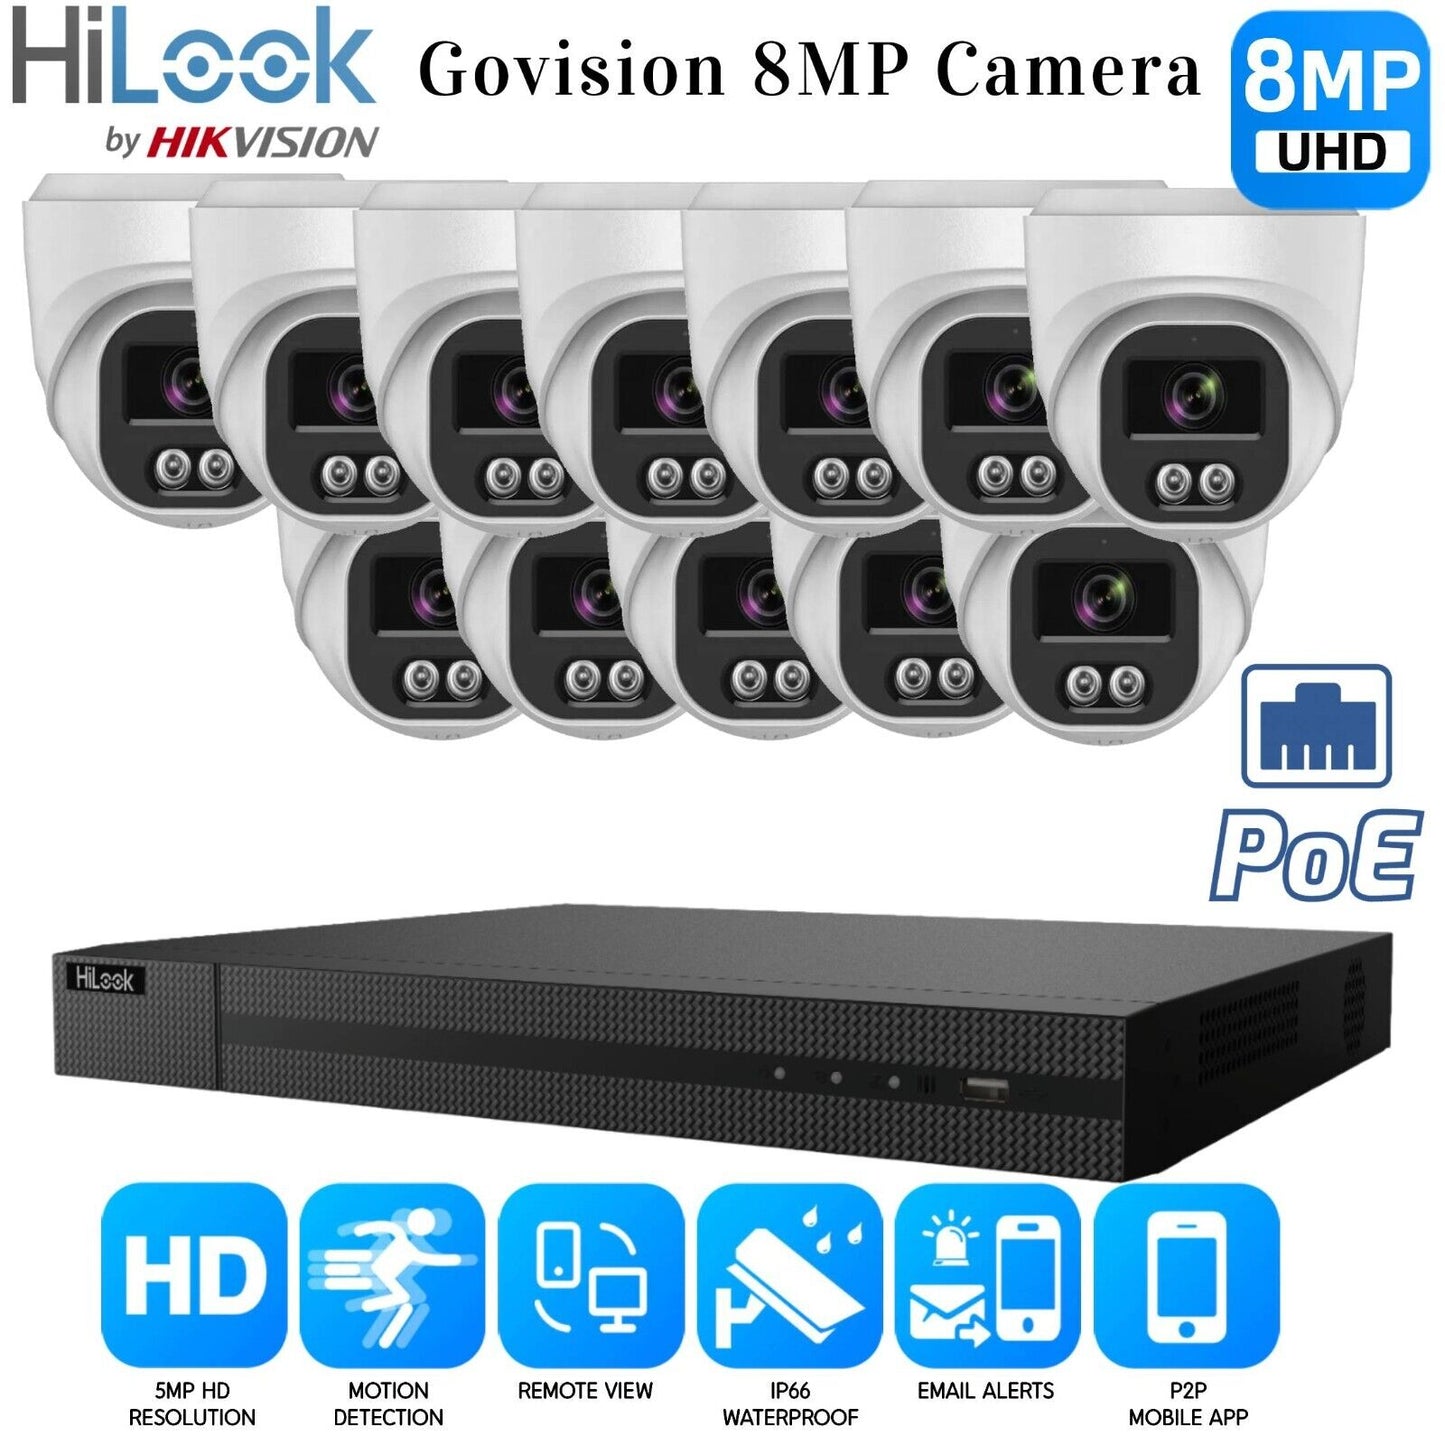 HIKVISION CCTV SYSTEM IP POE 8MP AUDIO MIC CAMERA SMART NIGHTVISION SECURITY KIT 16CH NVR 12x Cameras 2TB HDD